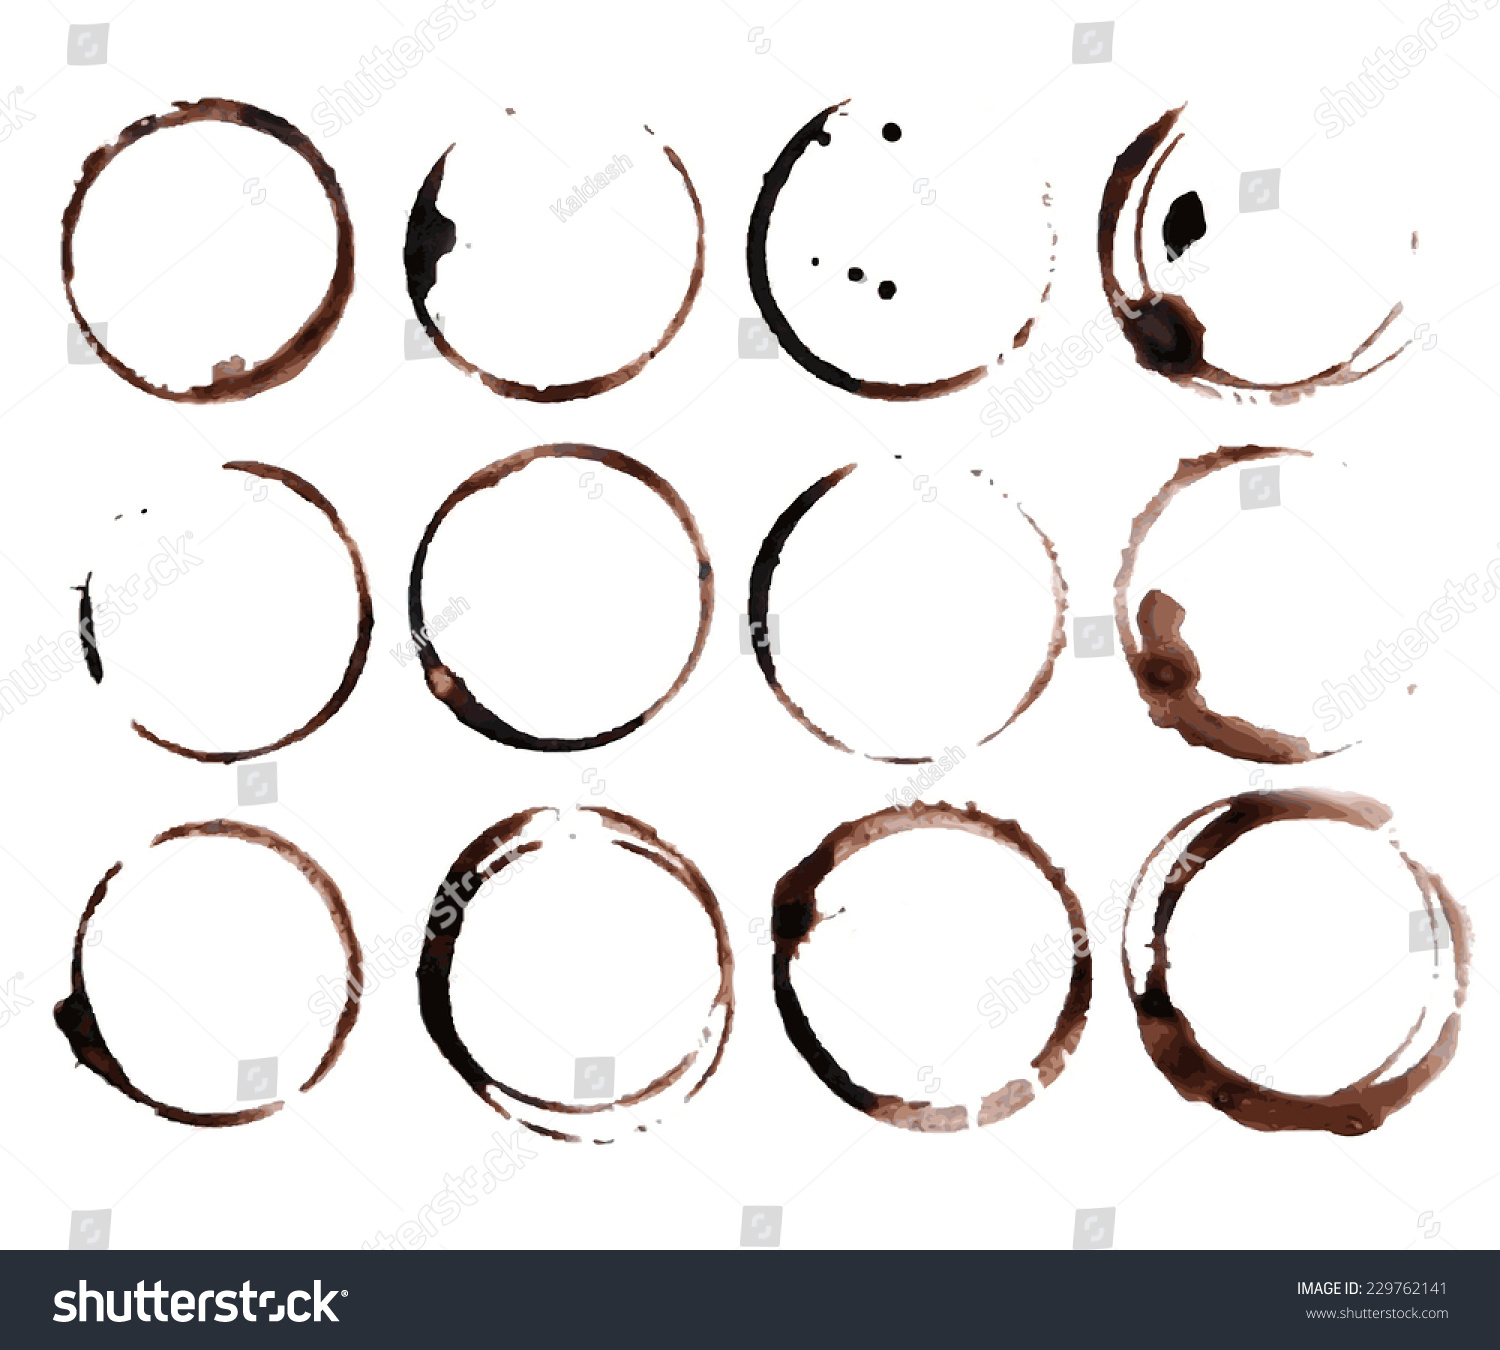 Coffee Stain Rings Vector Stock Vector 229762141 - Shutterstock